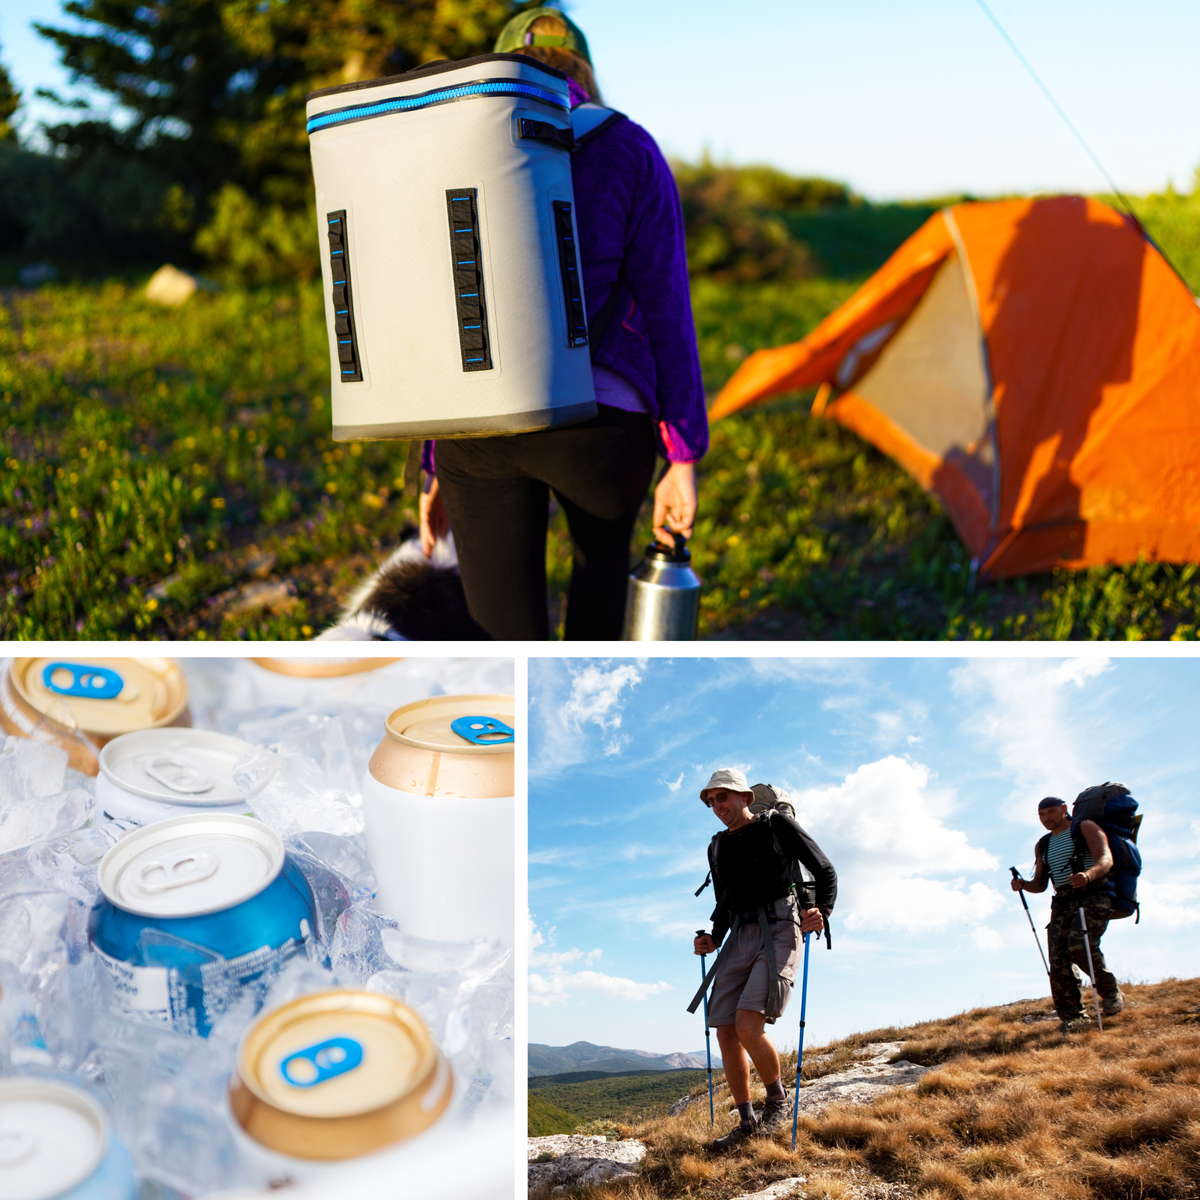 person carry backpack cooler, men hiking, cooler filled with icy beers.